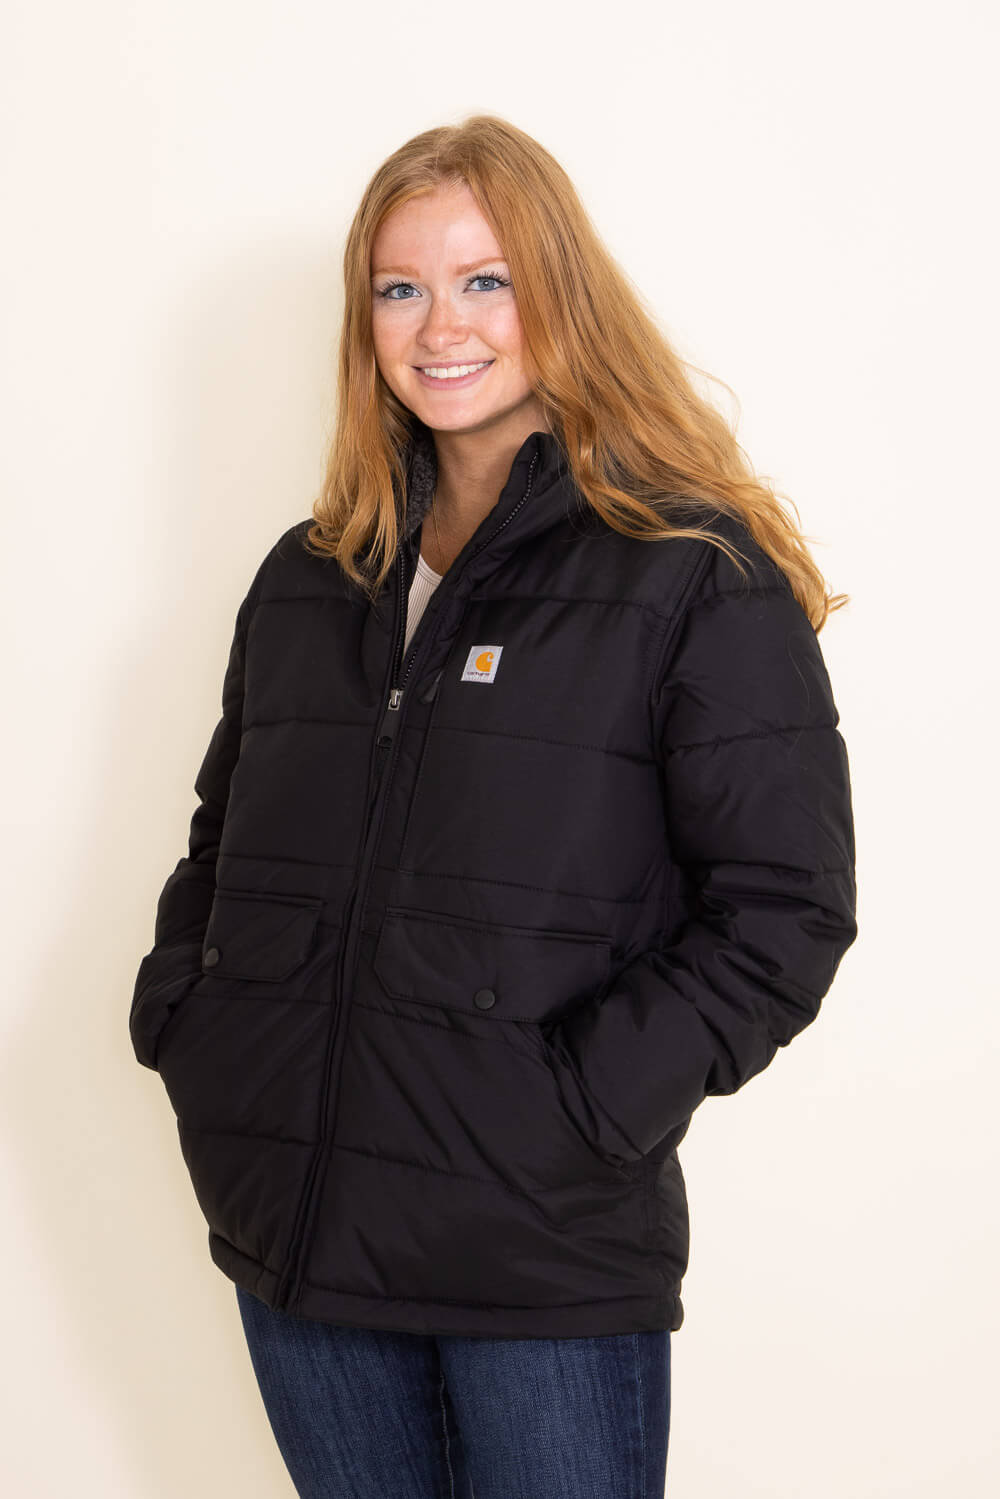 Carhartt Relaxed Fit Midweight Utility Jacket for Women in Black